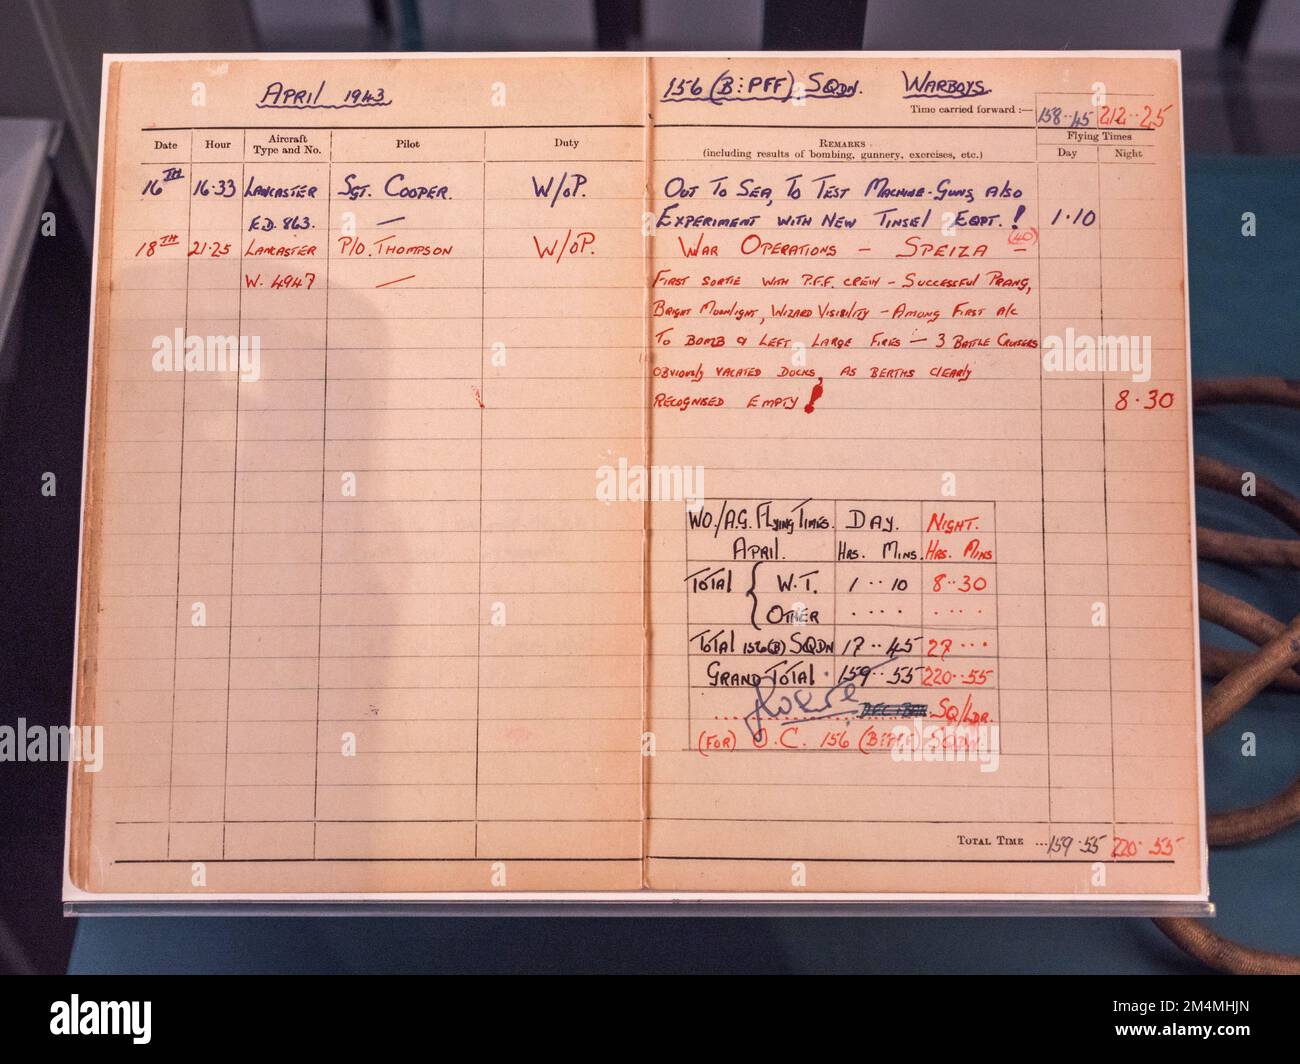 Flight log book of a RAF gunner from WWII, Imperial War Museum, London, UK. Stock Photo